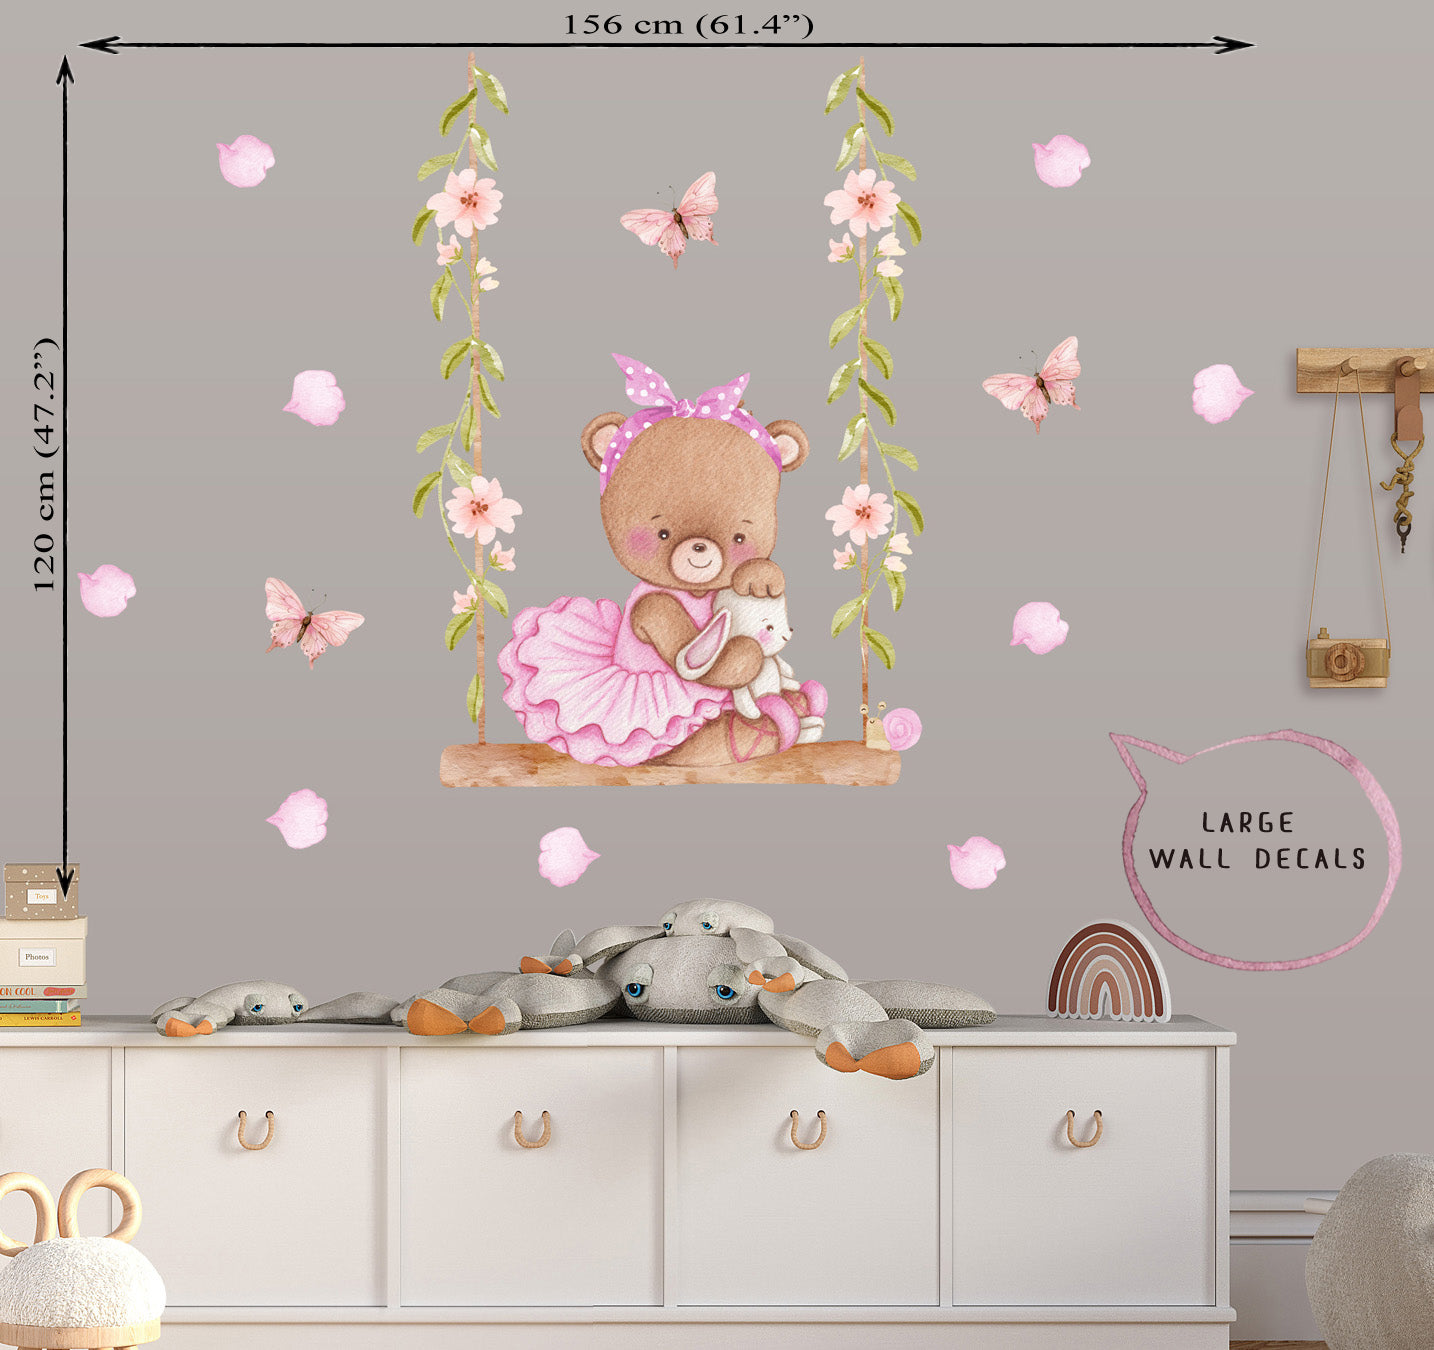 Teddy bear ballerina - big wall decals for children's room. The rose and butterflies.